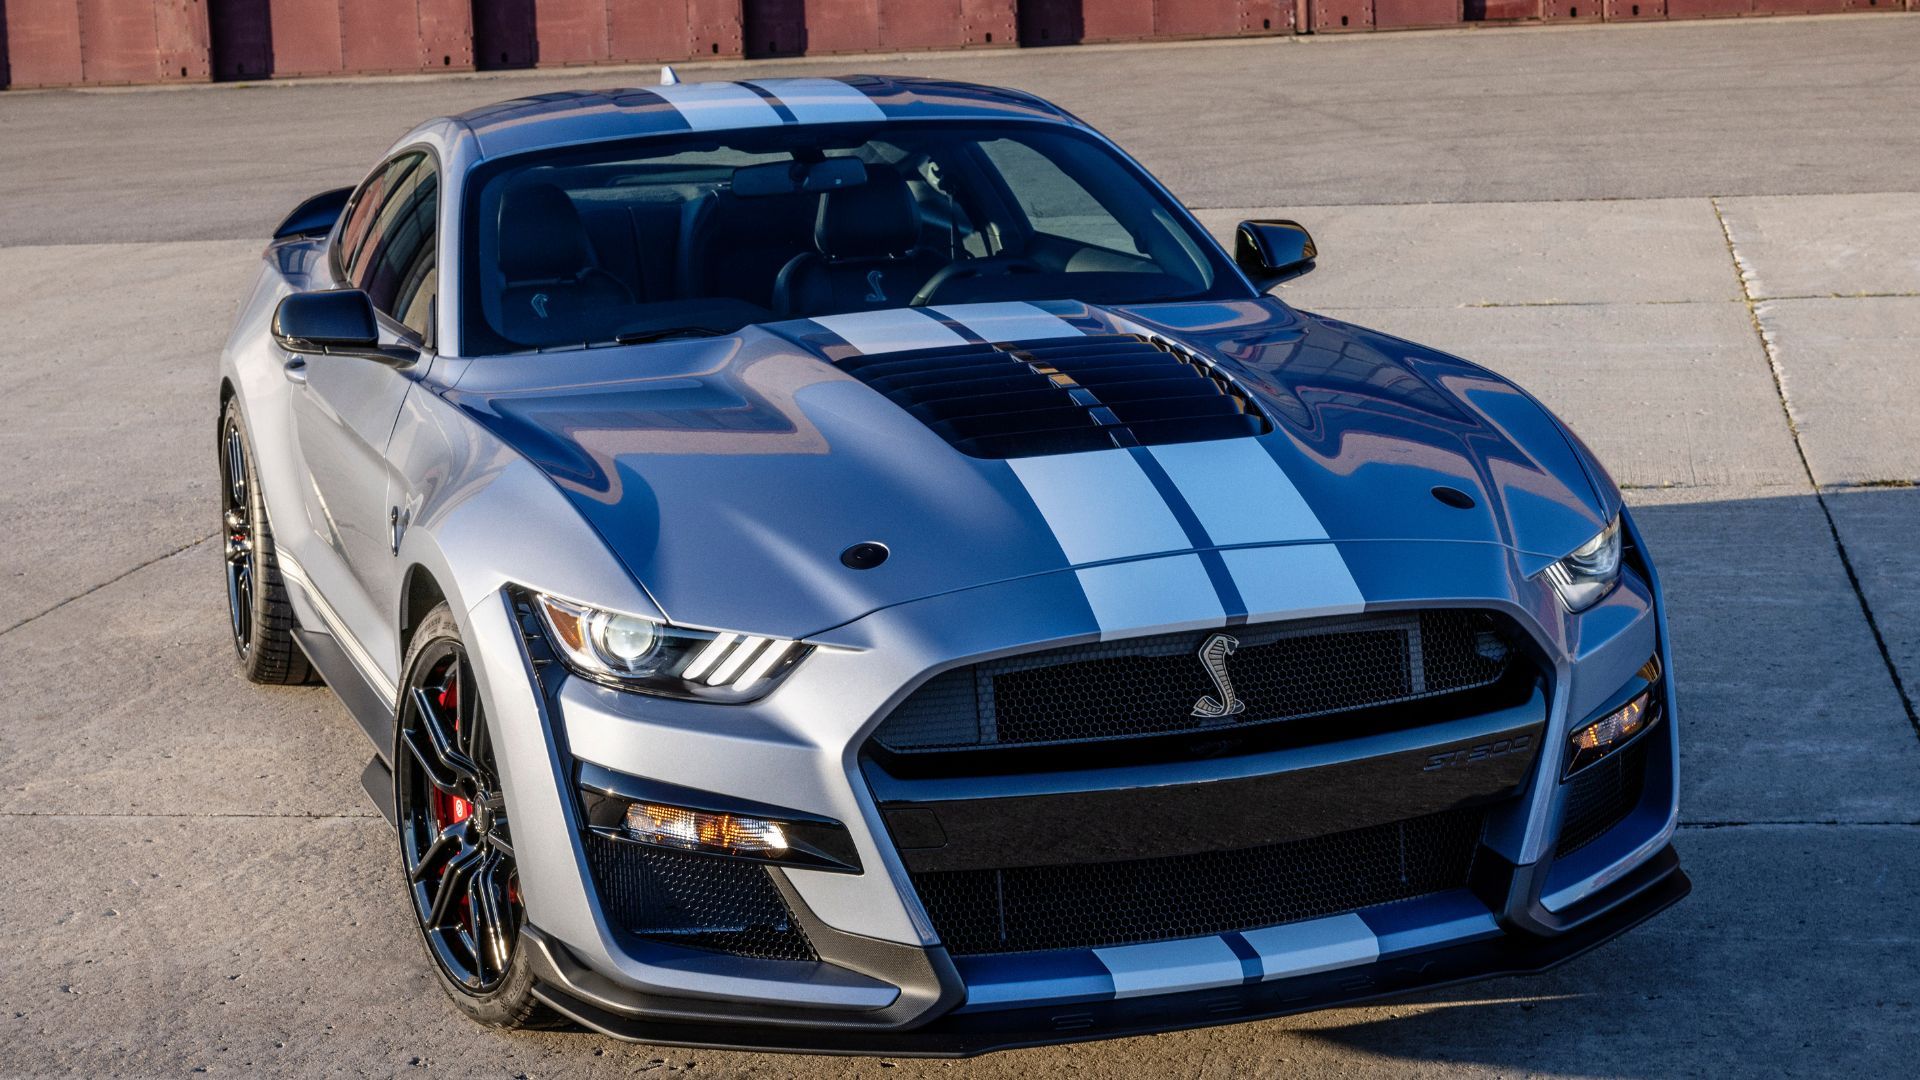 Shelby GT500 Auctions For Over $1 Million